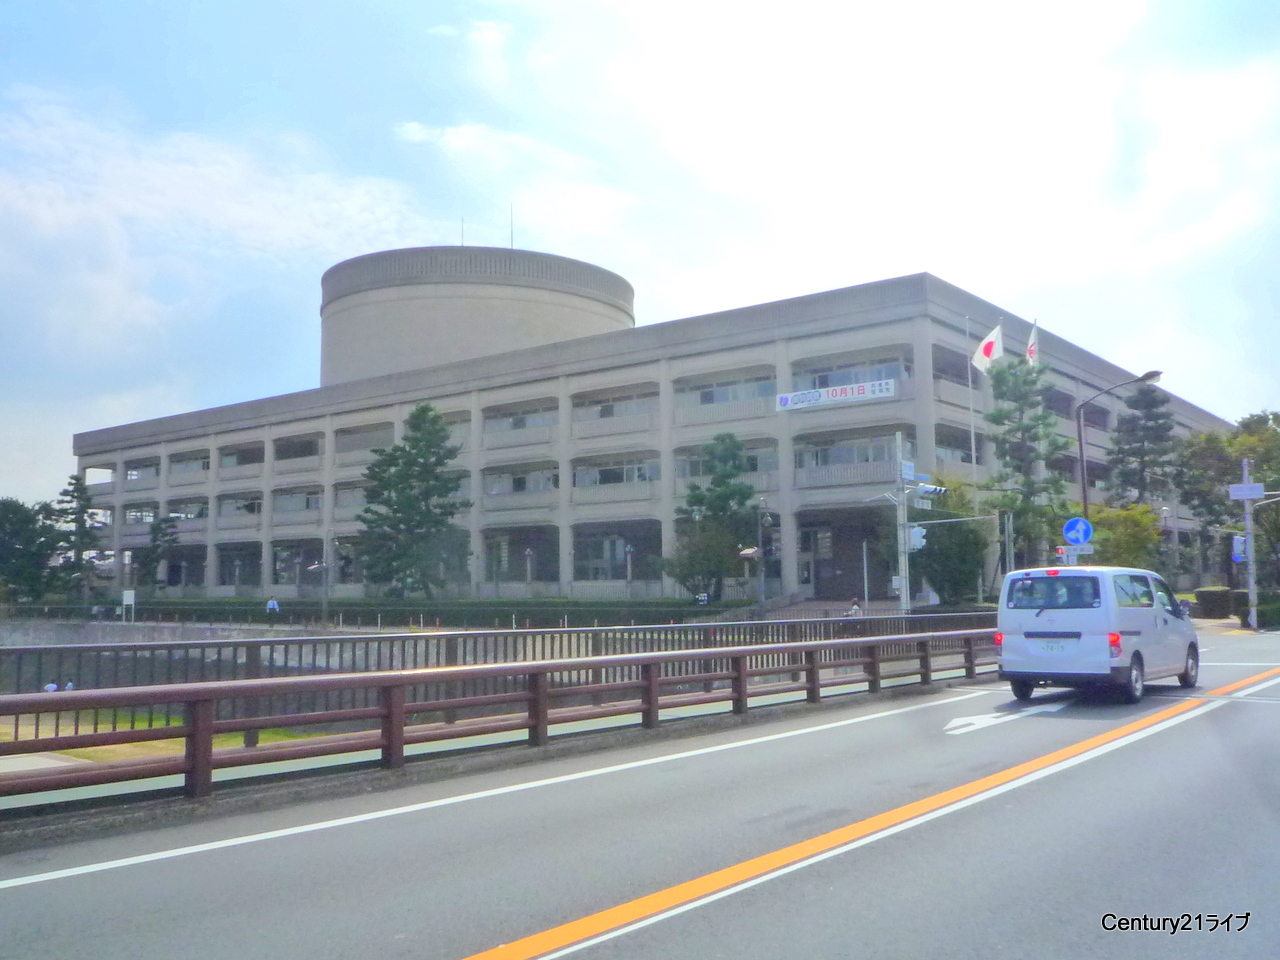 Government office. Takarazuka 3883m up to City Hall (government office)